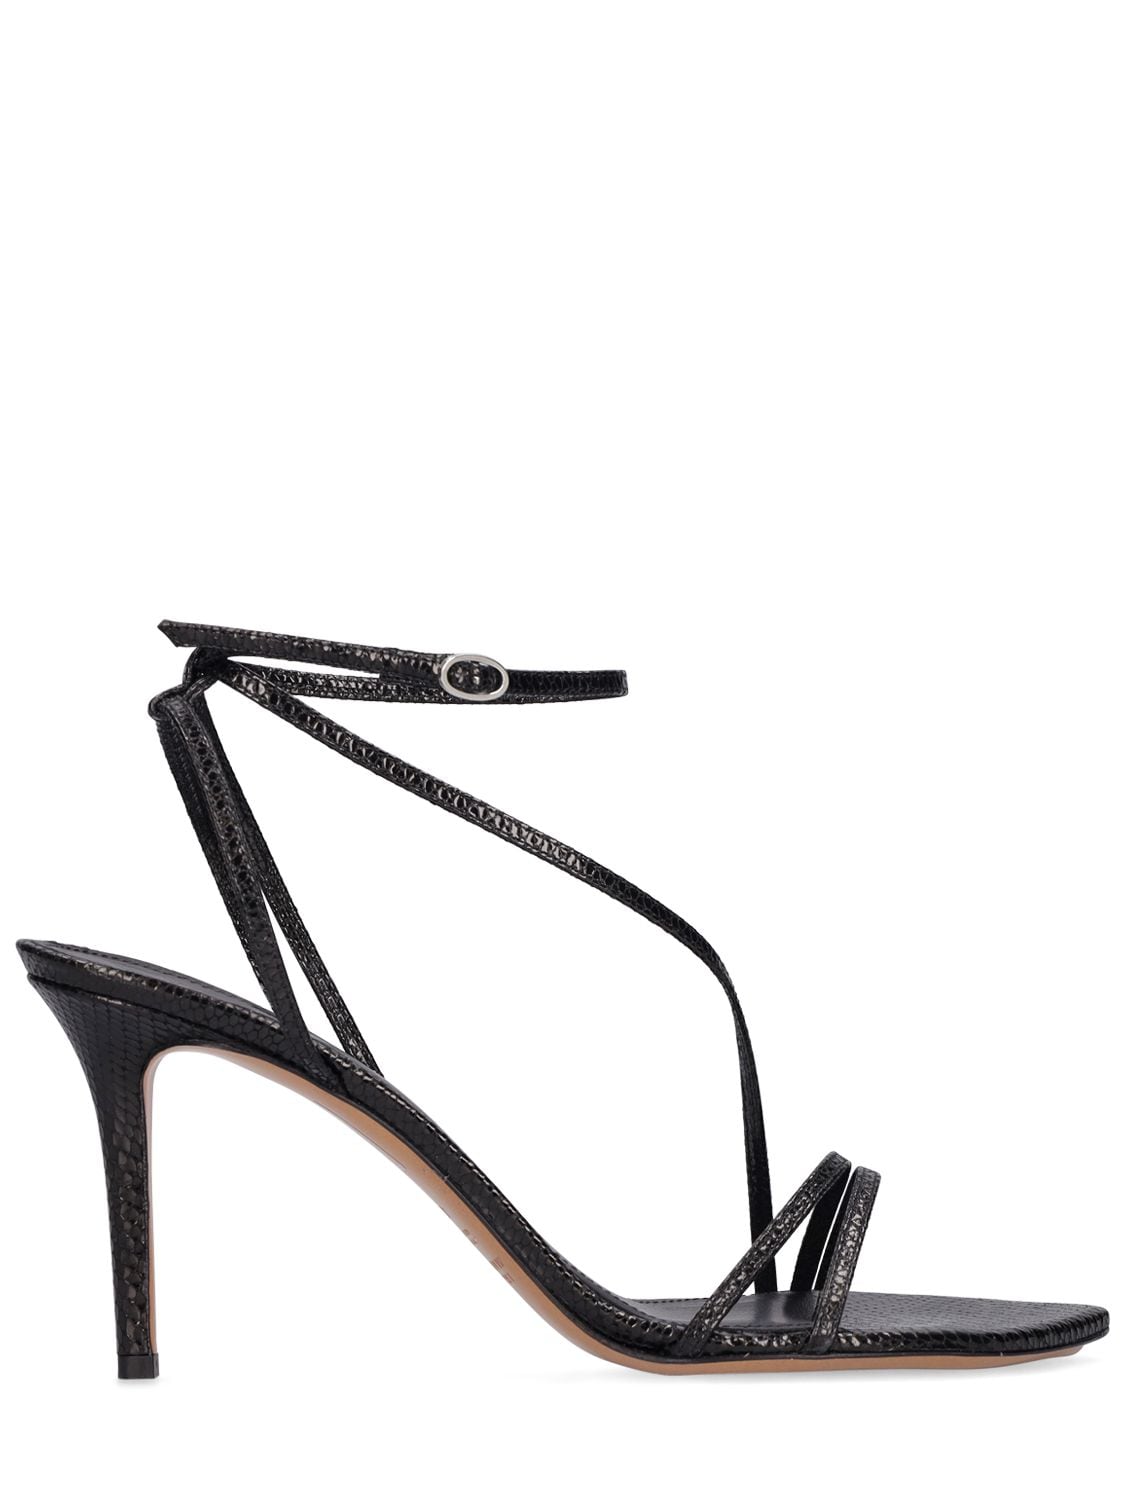 Isabel Marant 85mm Axee Python Print Leather Sandals In Black